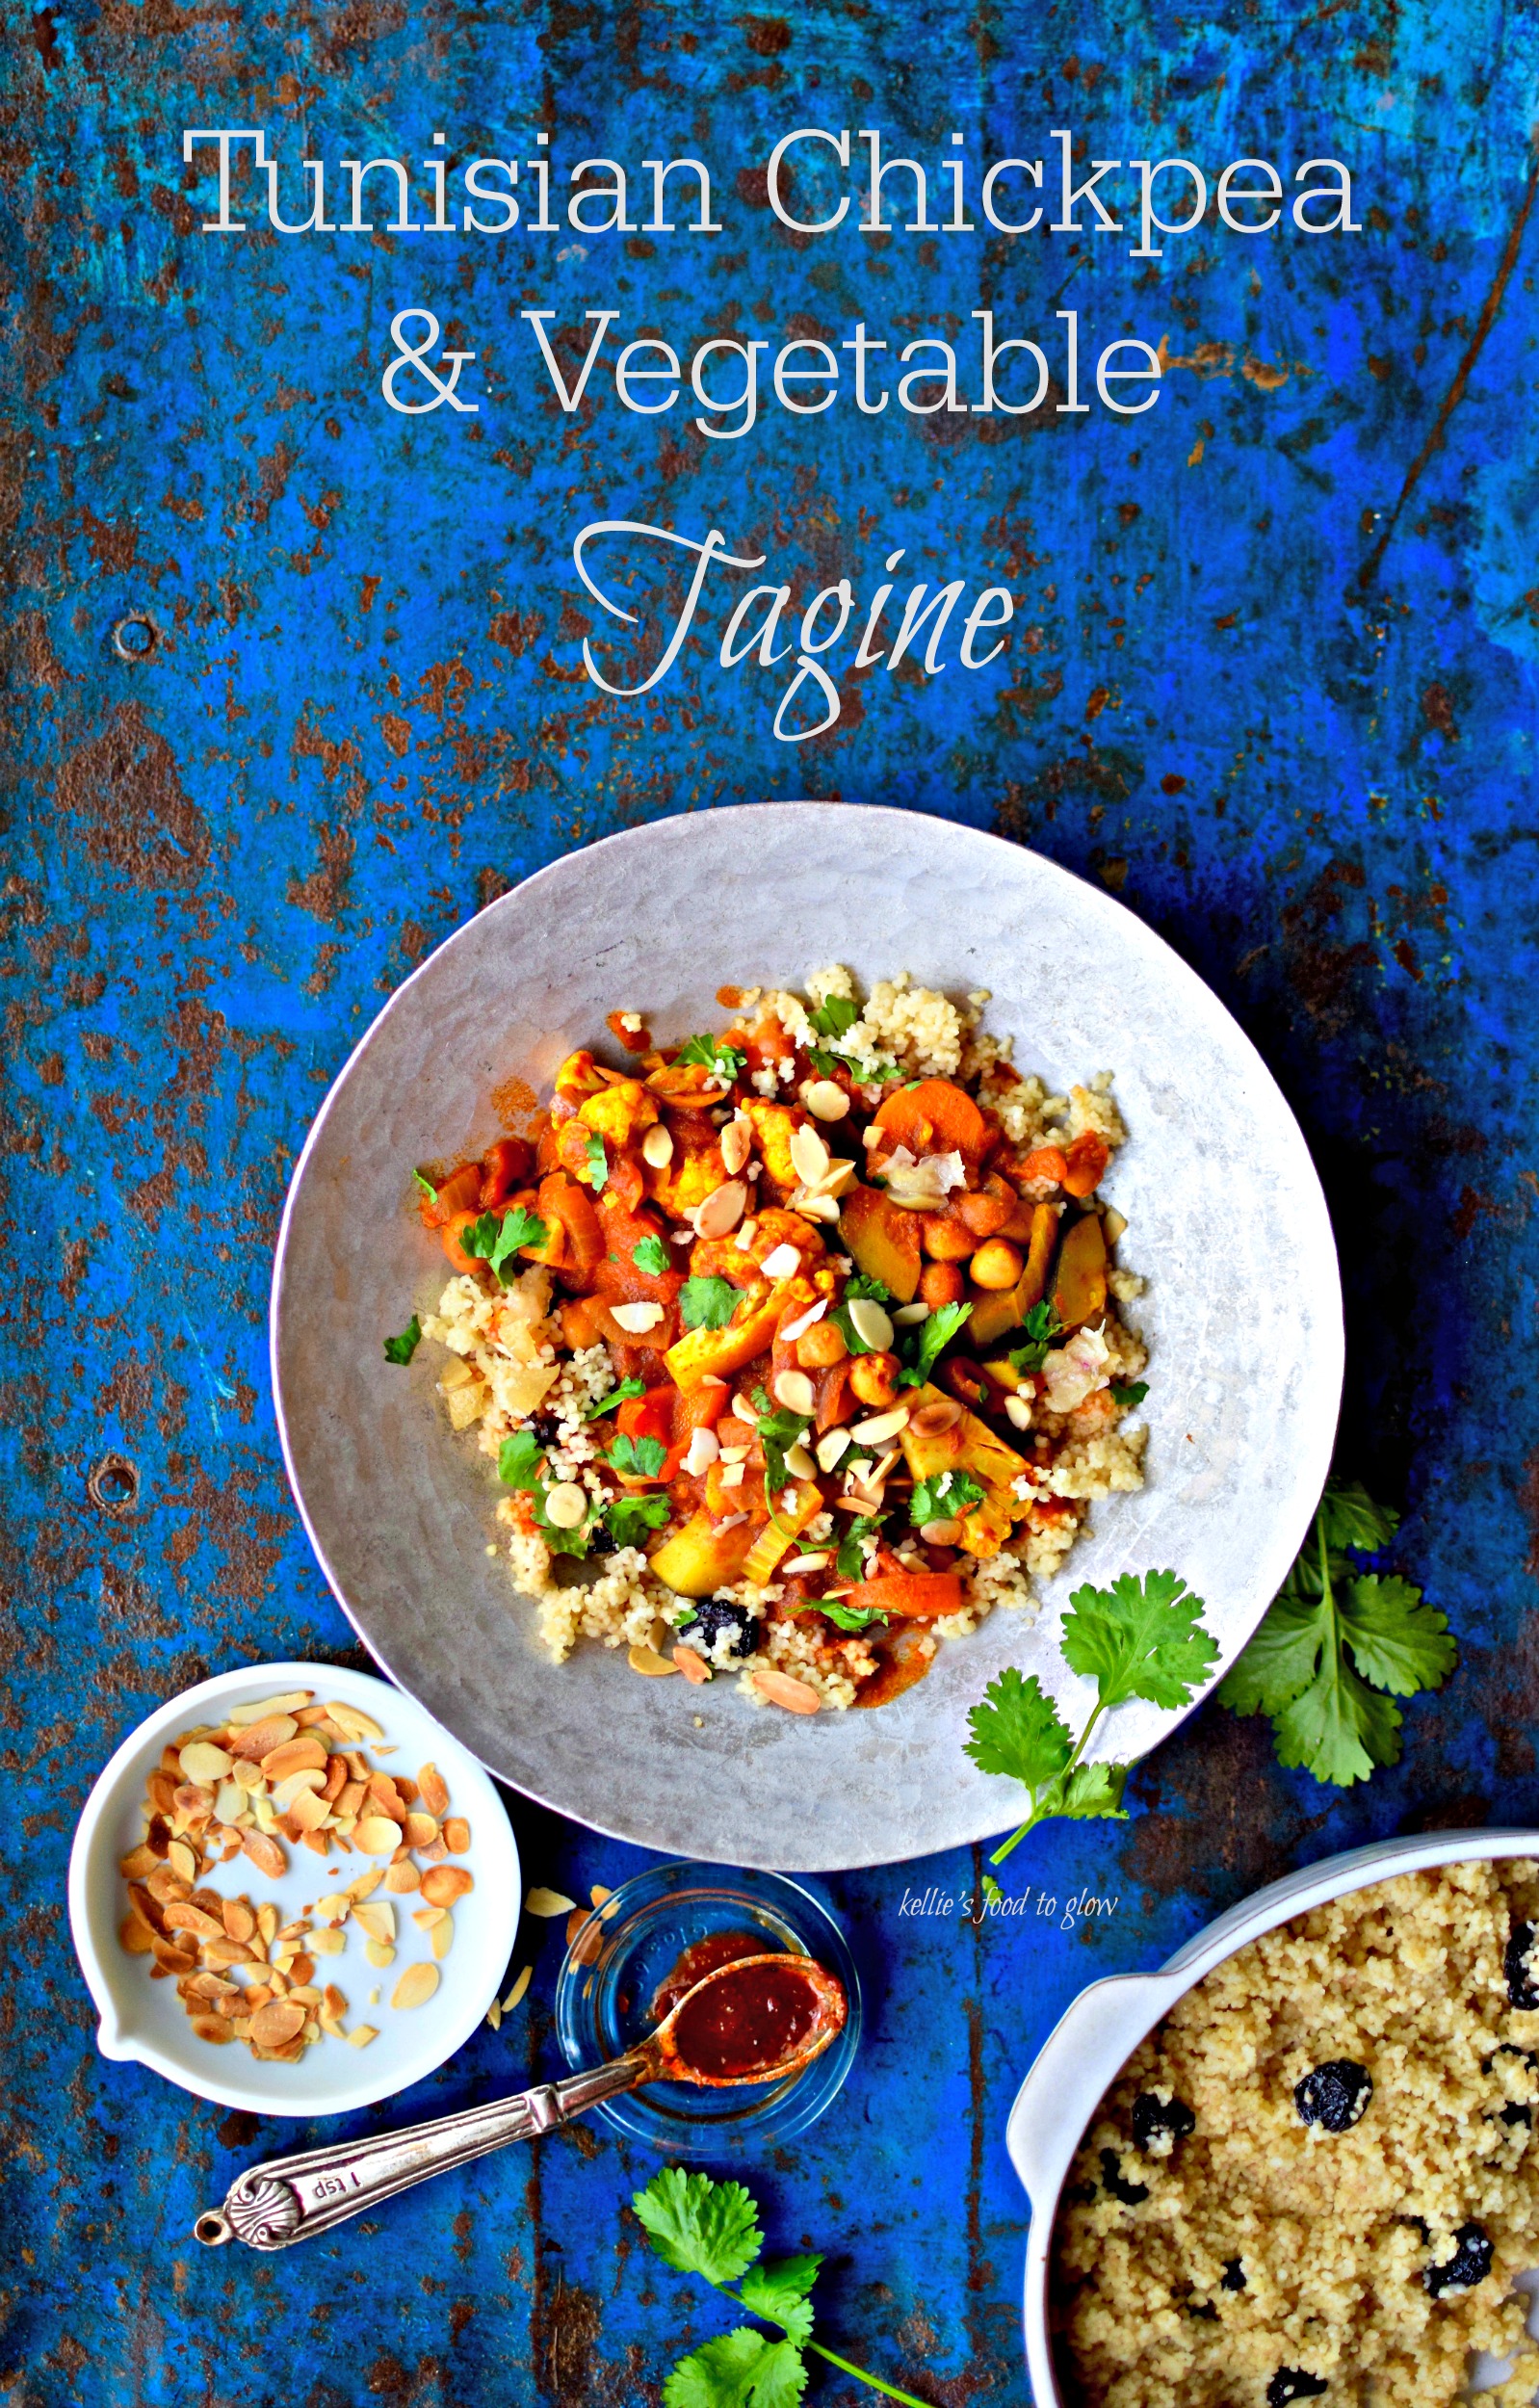 This is an easy, warming vegan stew that is easy to double or halve, gets better as leftovers and freezes well. And as if that weren’t enough, this tagine lends itself to using seasonal vegetable so is economical and environmentally friendly, too. In the summer, use more Mediterranean type veg and serve at room temperature. At any time of the year you can speed up the prep by using frozen vegetables. Serve for dinner or lunch with green salad plus couscous, quinoa, baked potato, steamed pitta bread or in wraps. Extra harissa and a few slices of griddled halloumi are great add-ins.